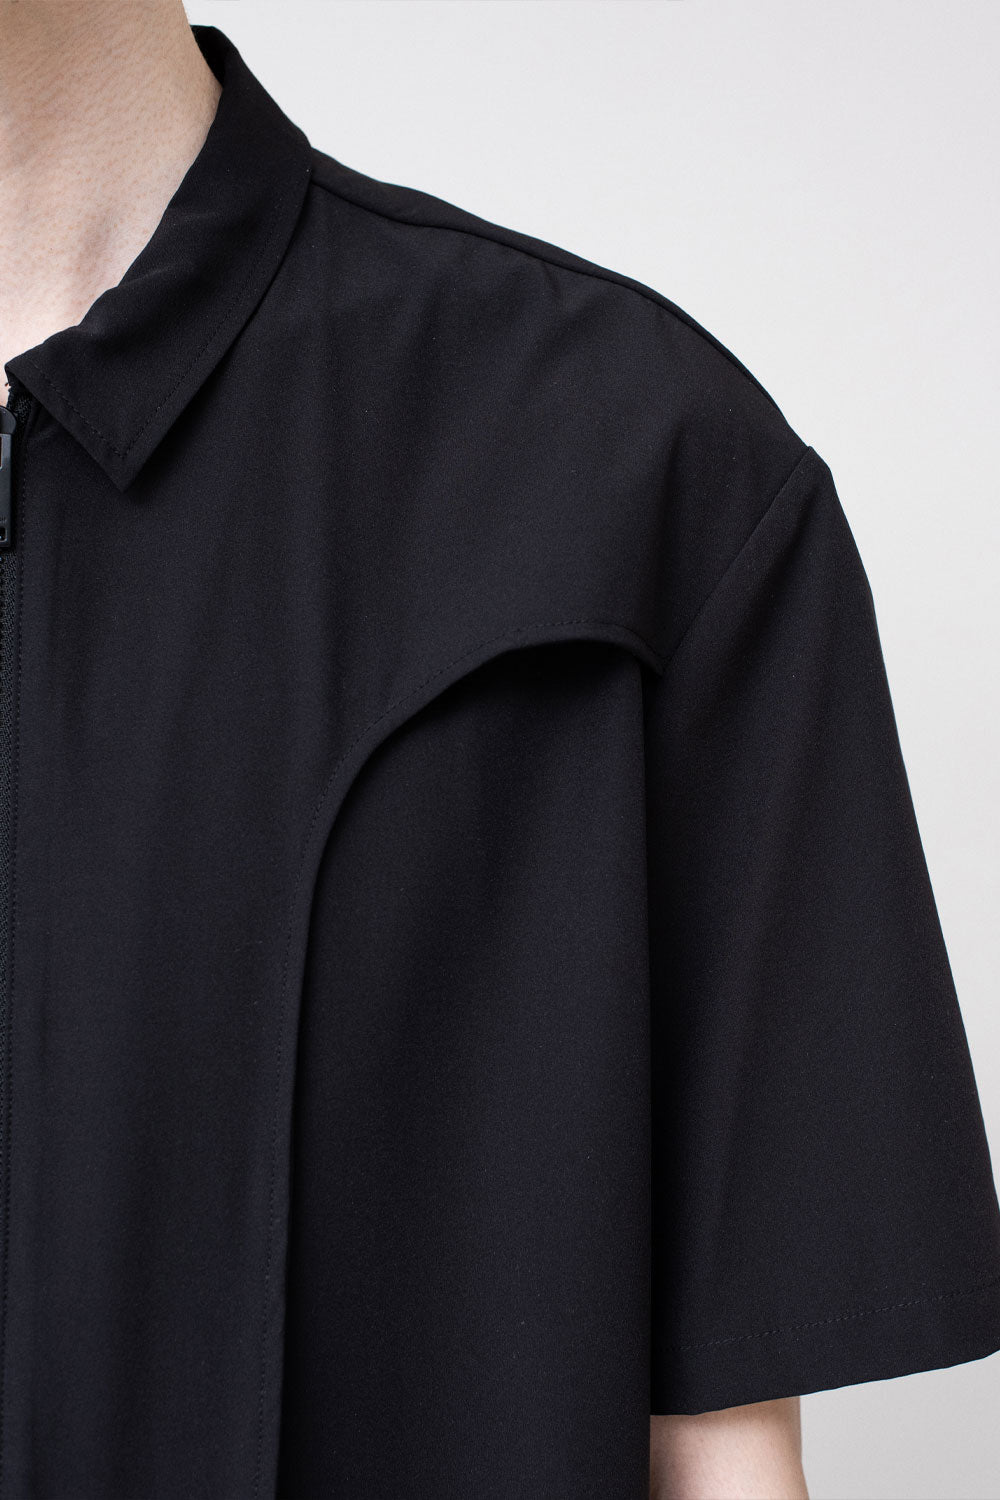 Buy the Han Kjobenhavn Washed Technical Zip S/S Shirt in Black at Intro. Spend £50 for free UK delivery. Official stockists. We ship worldwide.